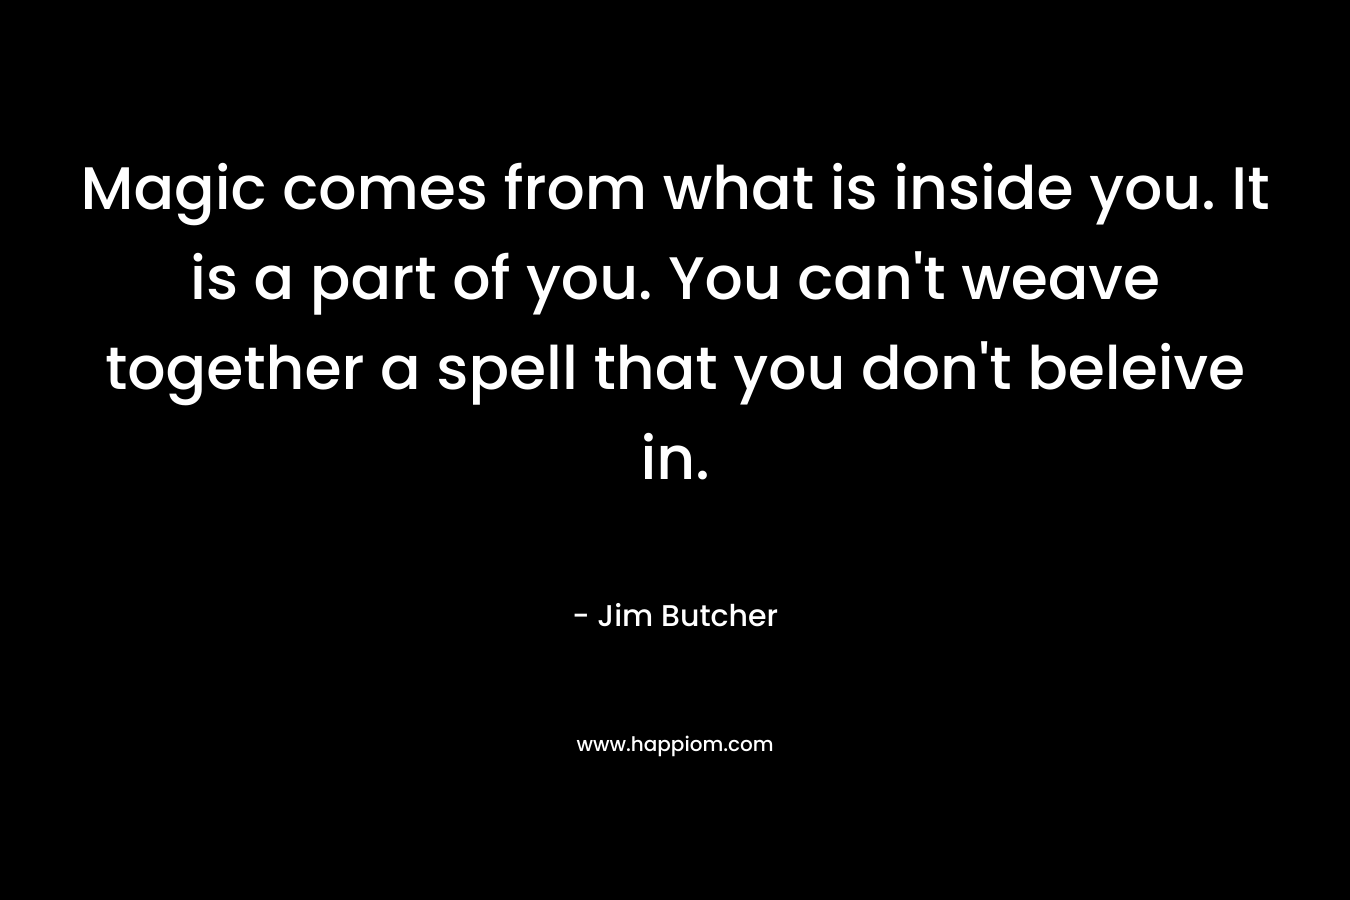 Magic comes from what is inside you. It is a part of you. You can’t weave together a spell that you don’t beleive in. – Jim Butcher